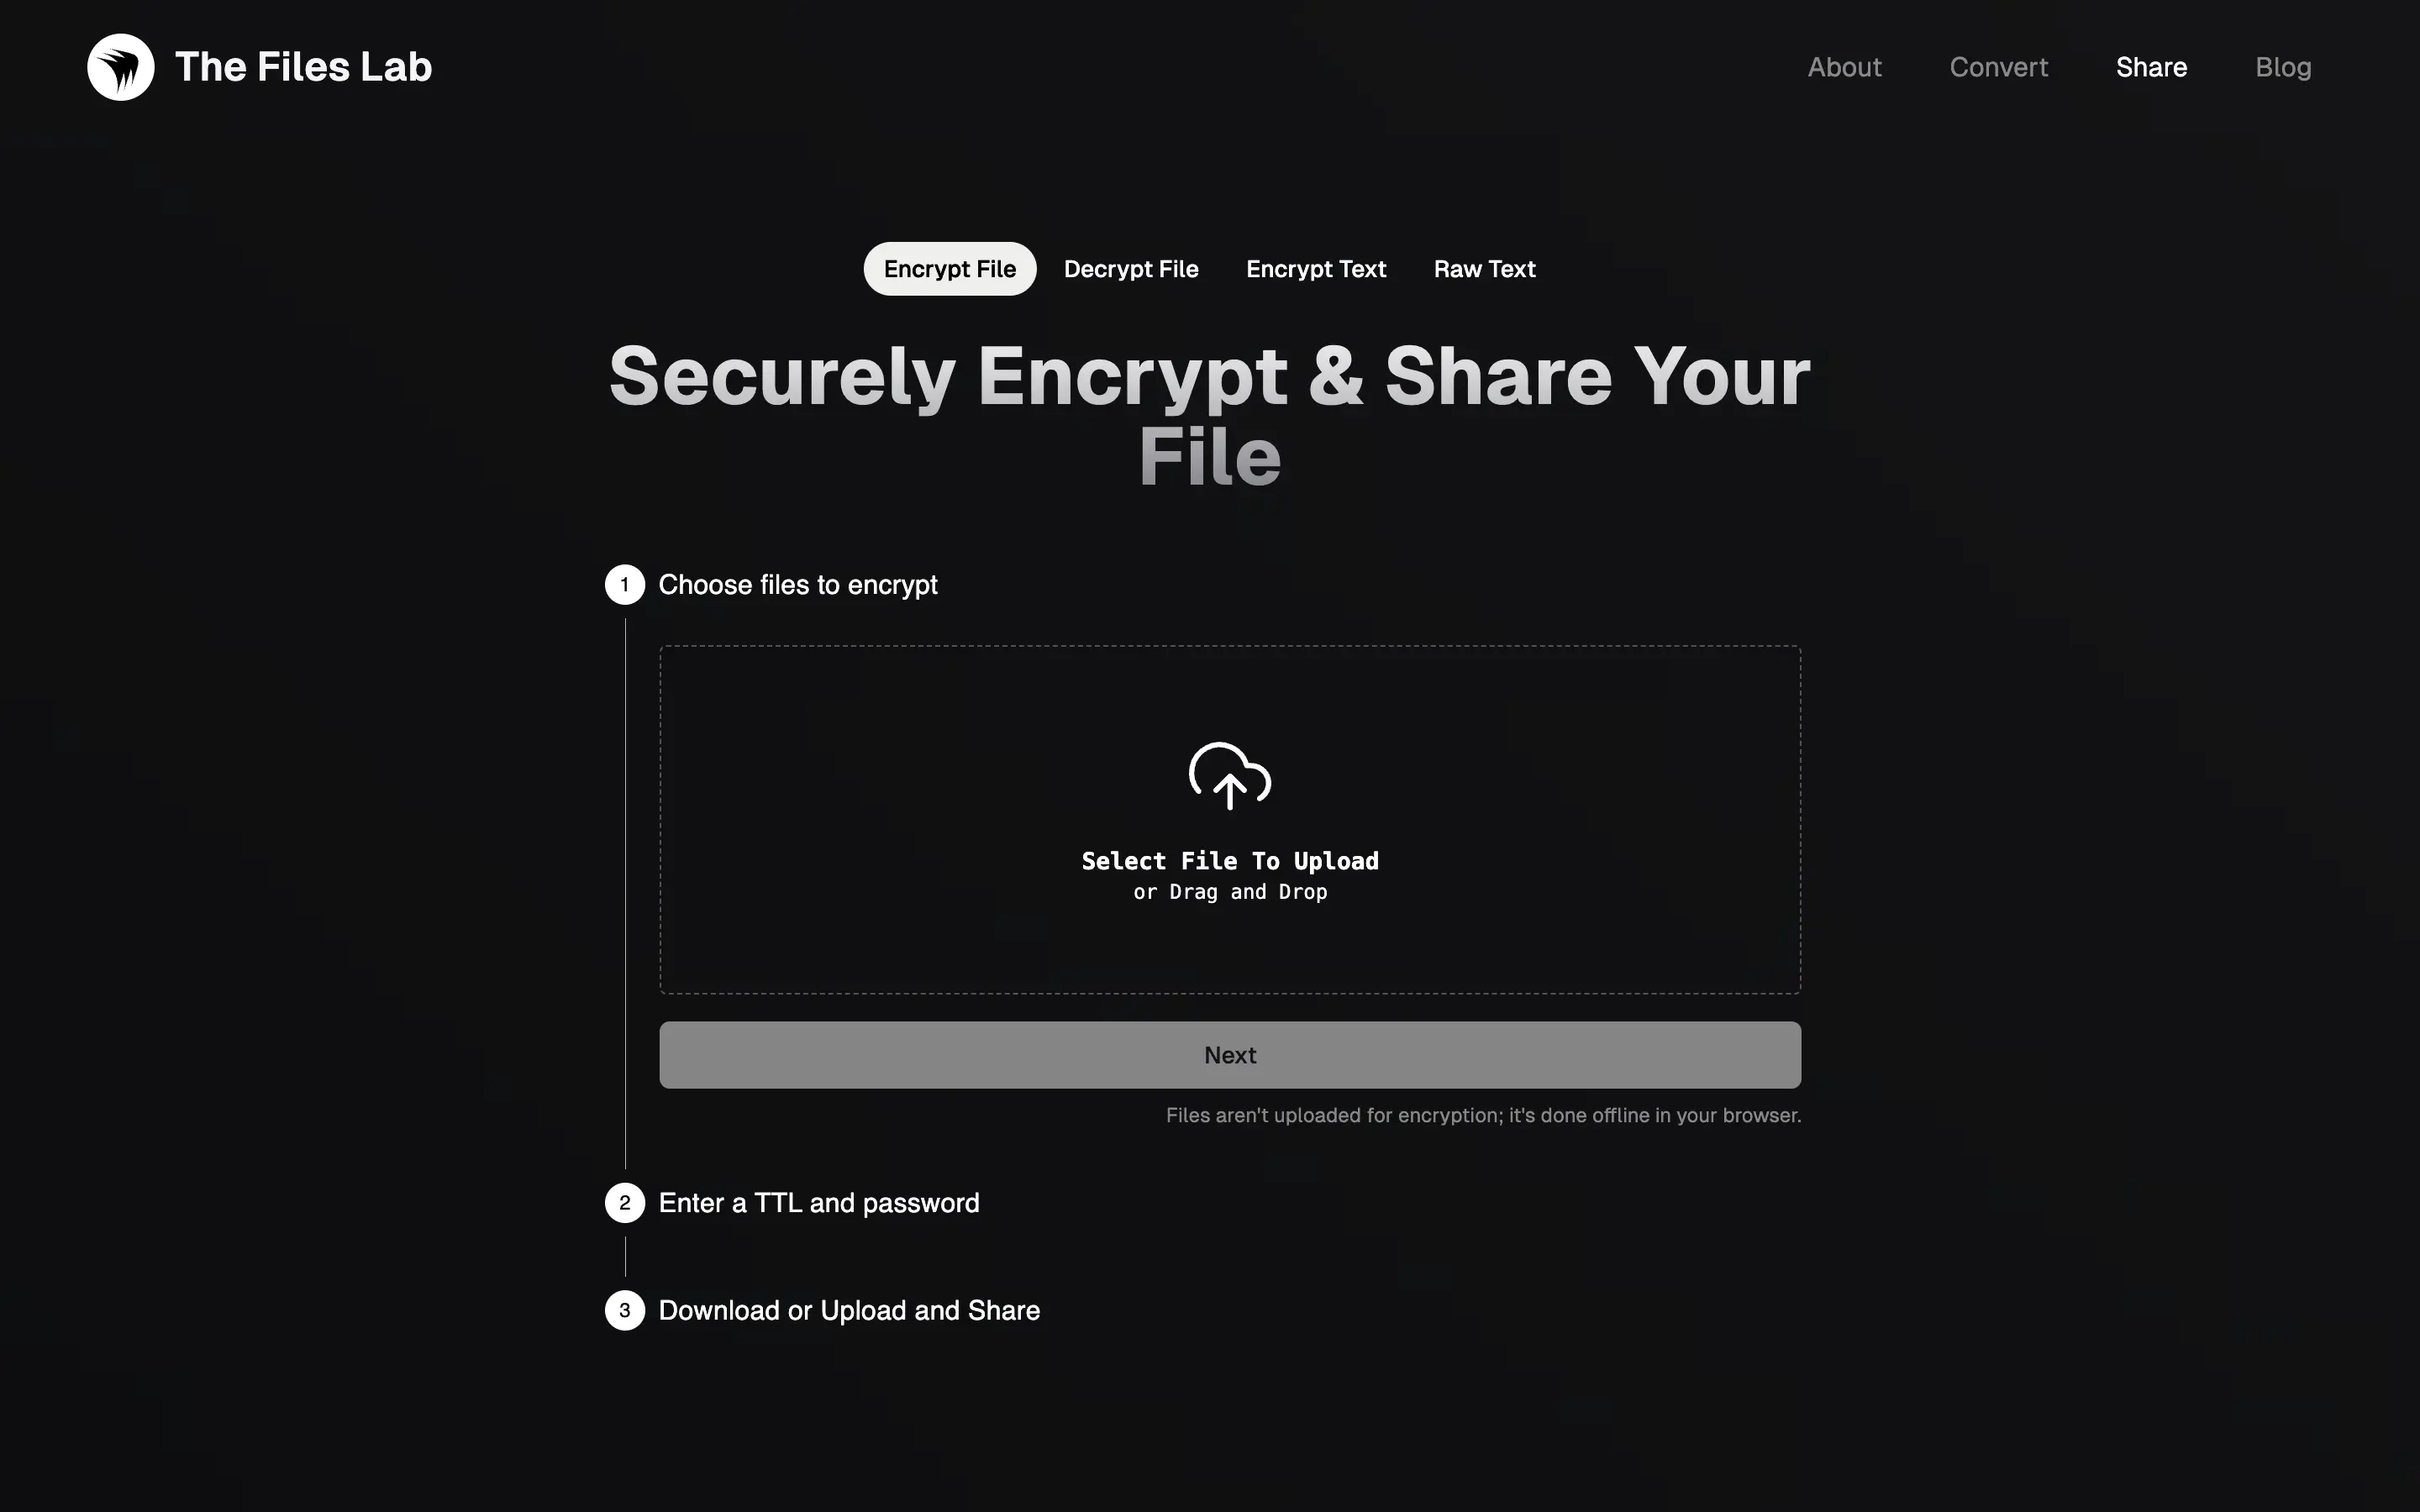 Fortify Your Data adding an Extra Layer of Security